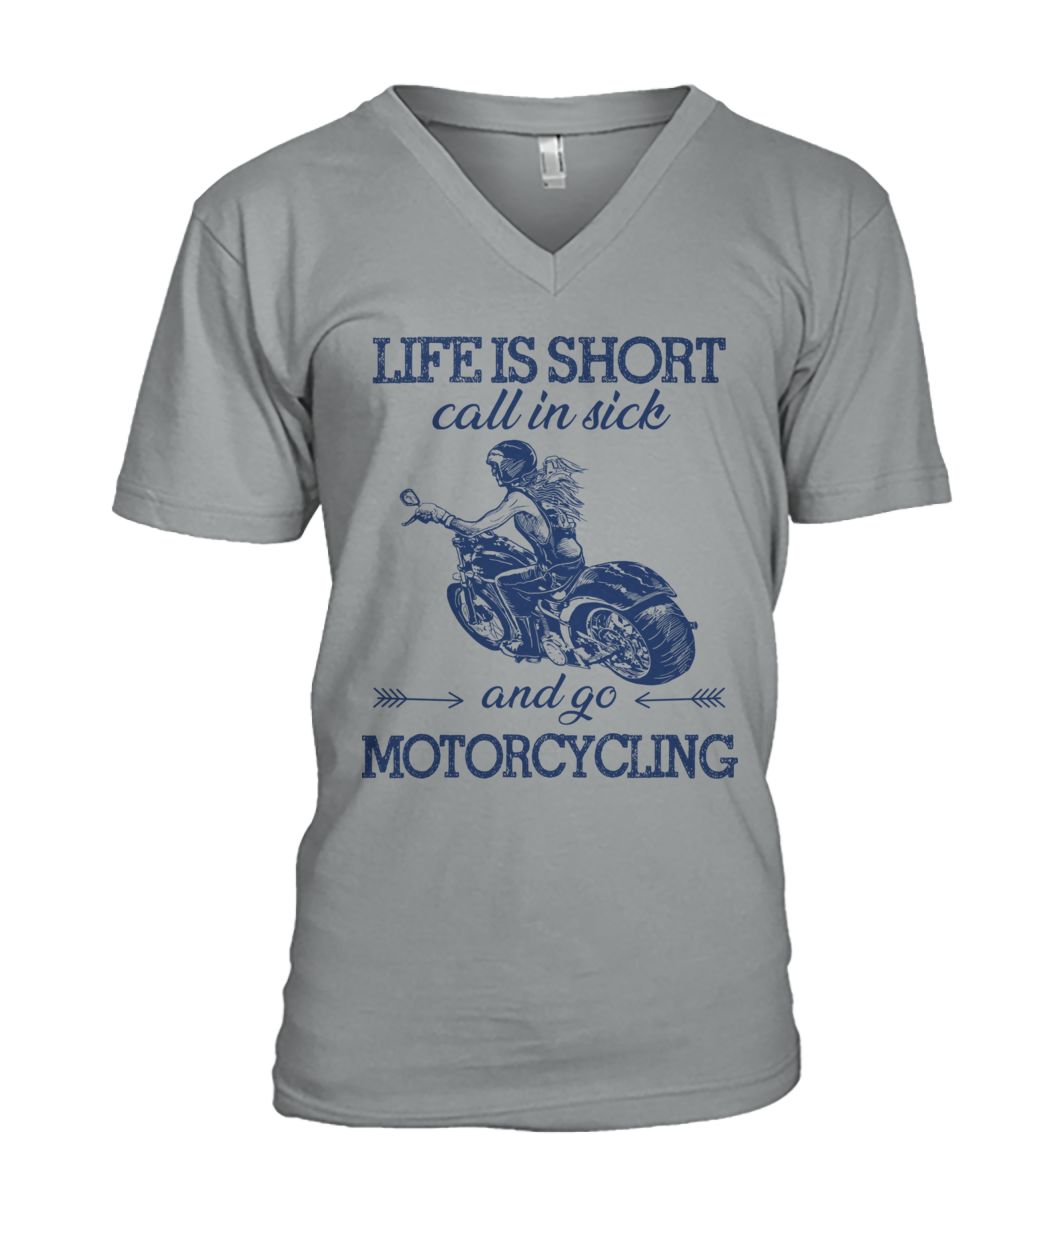 Life is short call in sick and go motorcycling mens v-neck